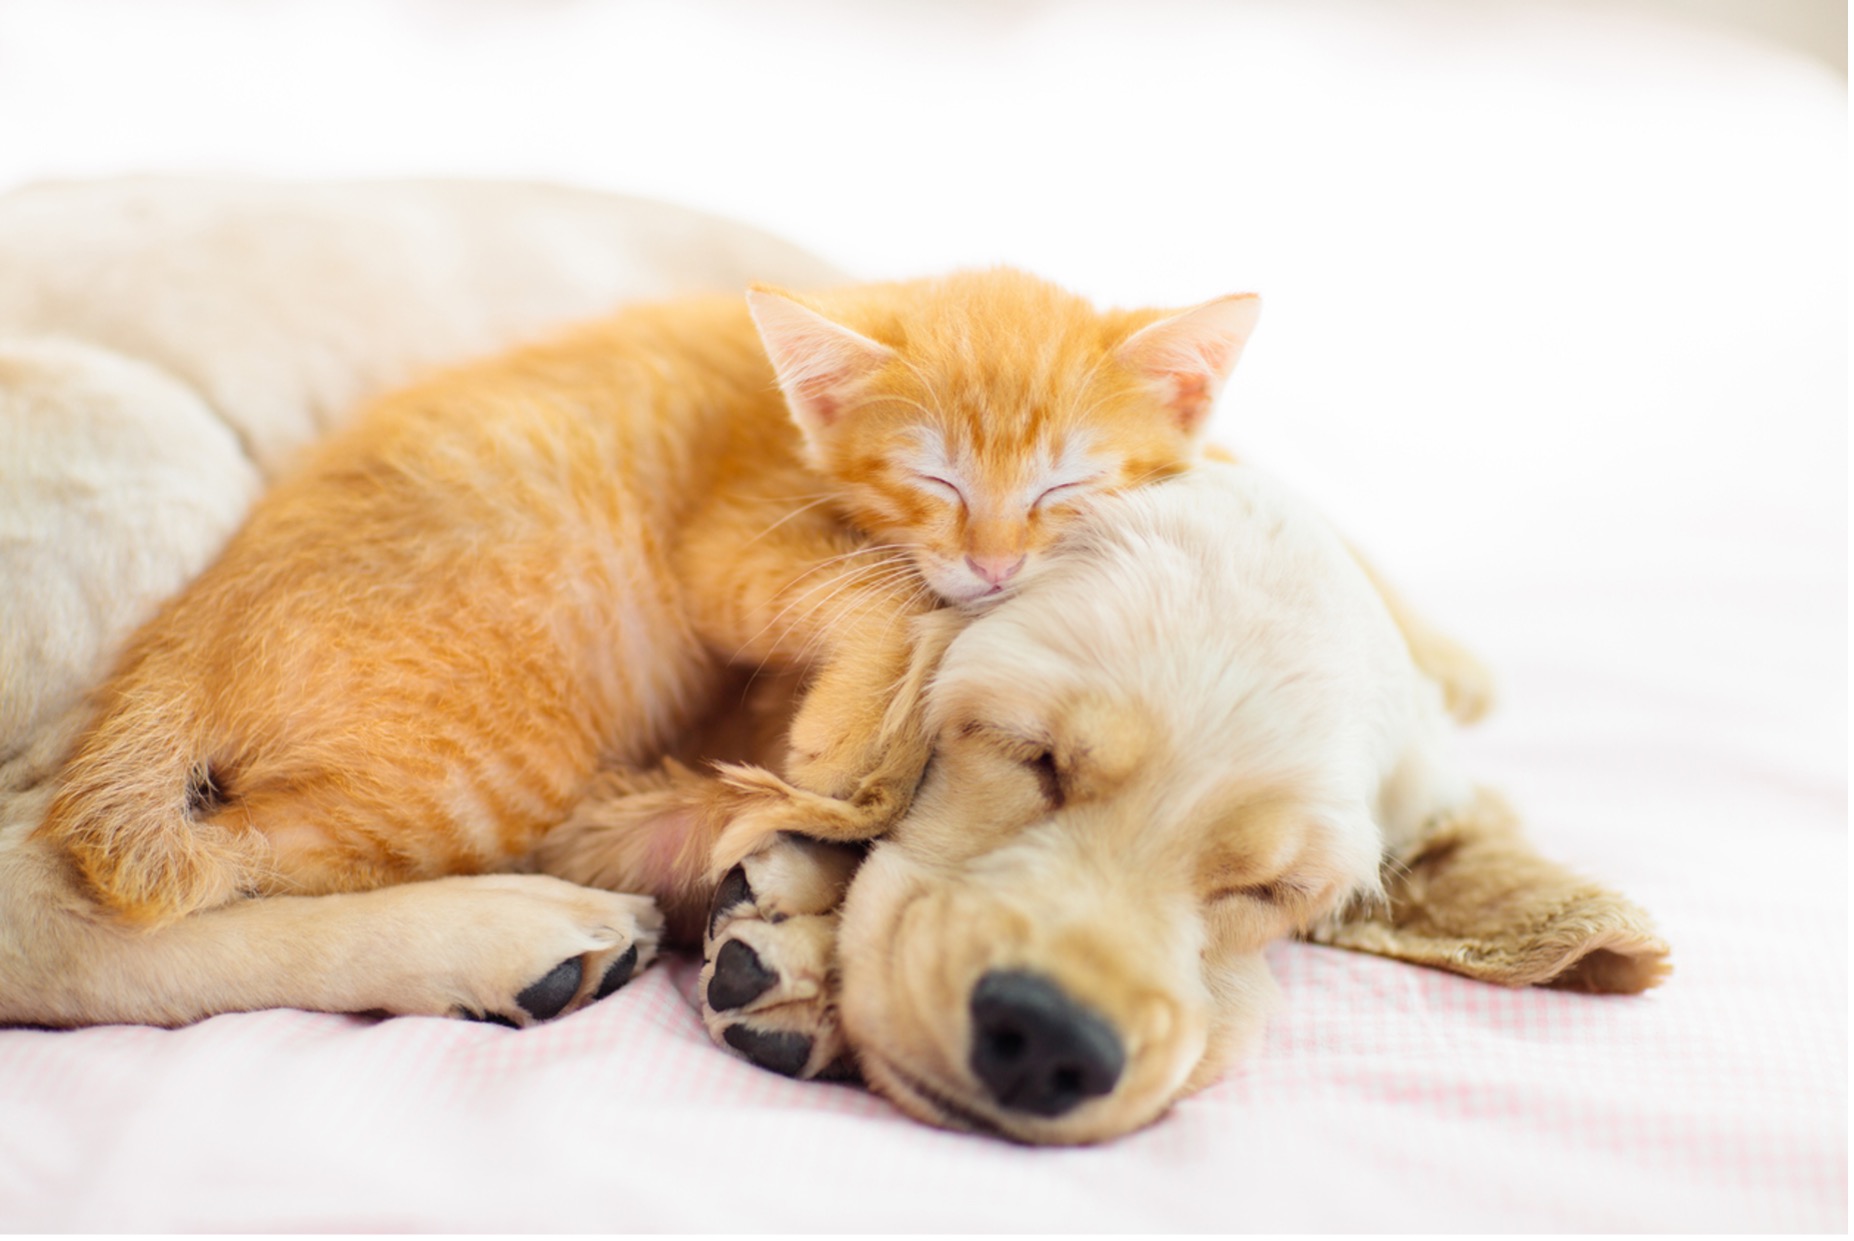 A picture containing kitten lying on top of a dog snuggling